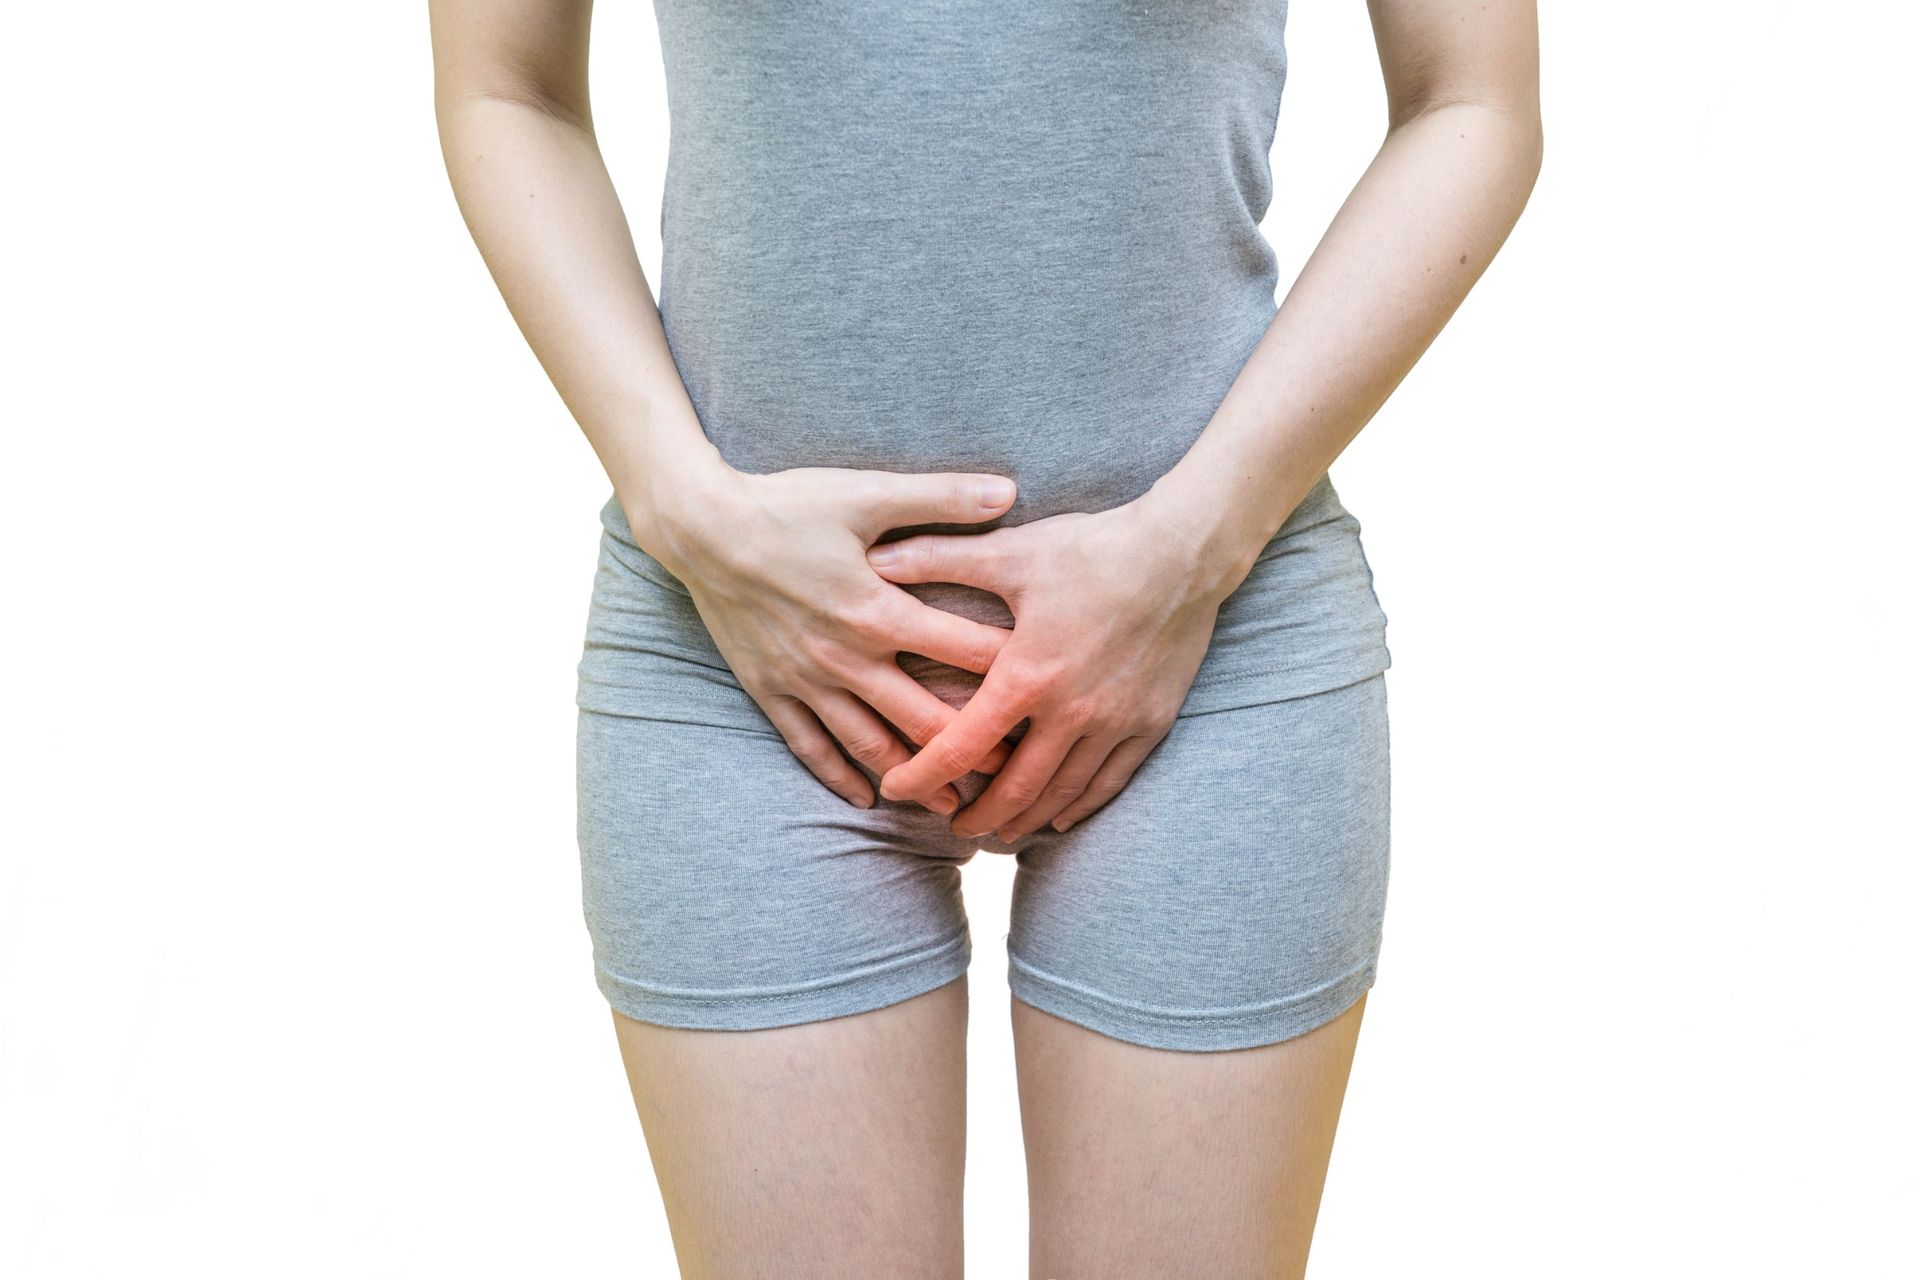 What Causes Pelvic Pain in Women?